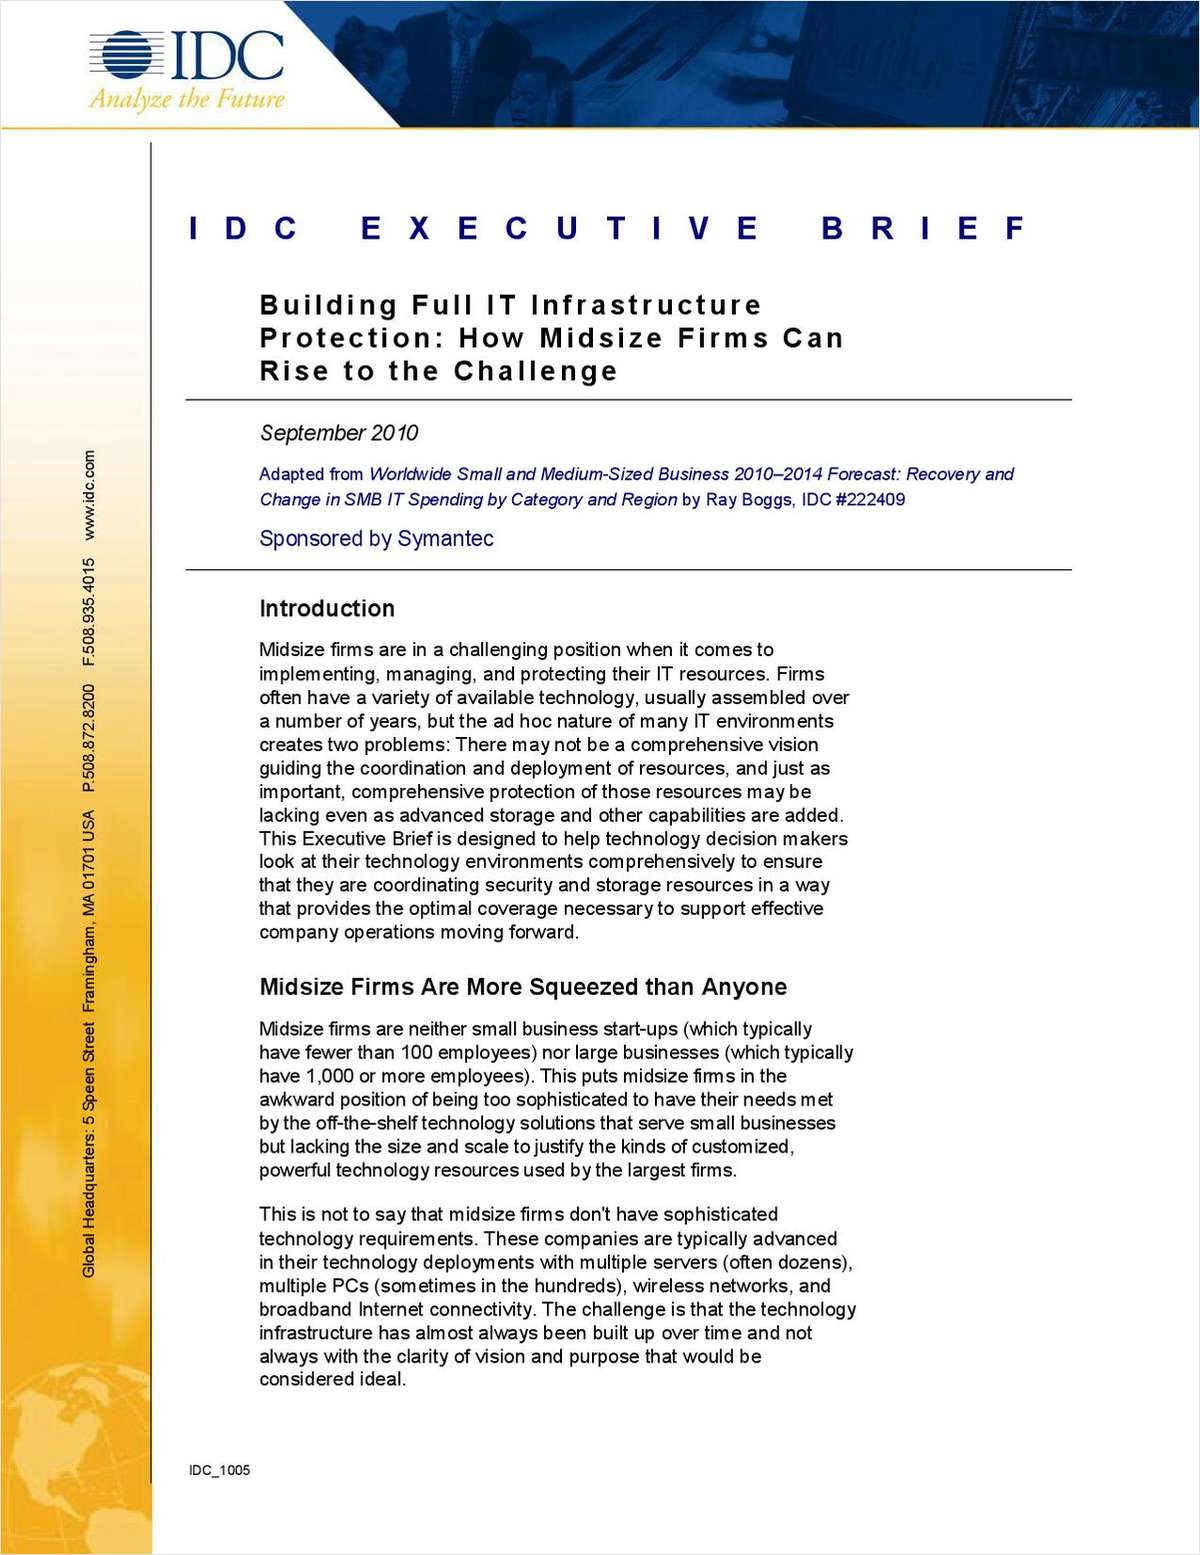 Building Full IT Infrastructure Protection: How Midsize Firms Can Rise to the Challenge